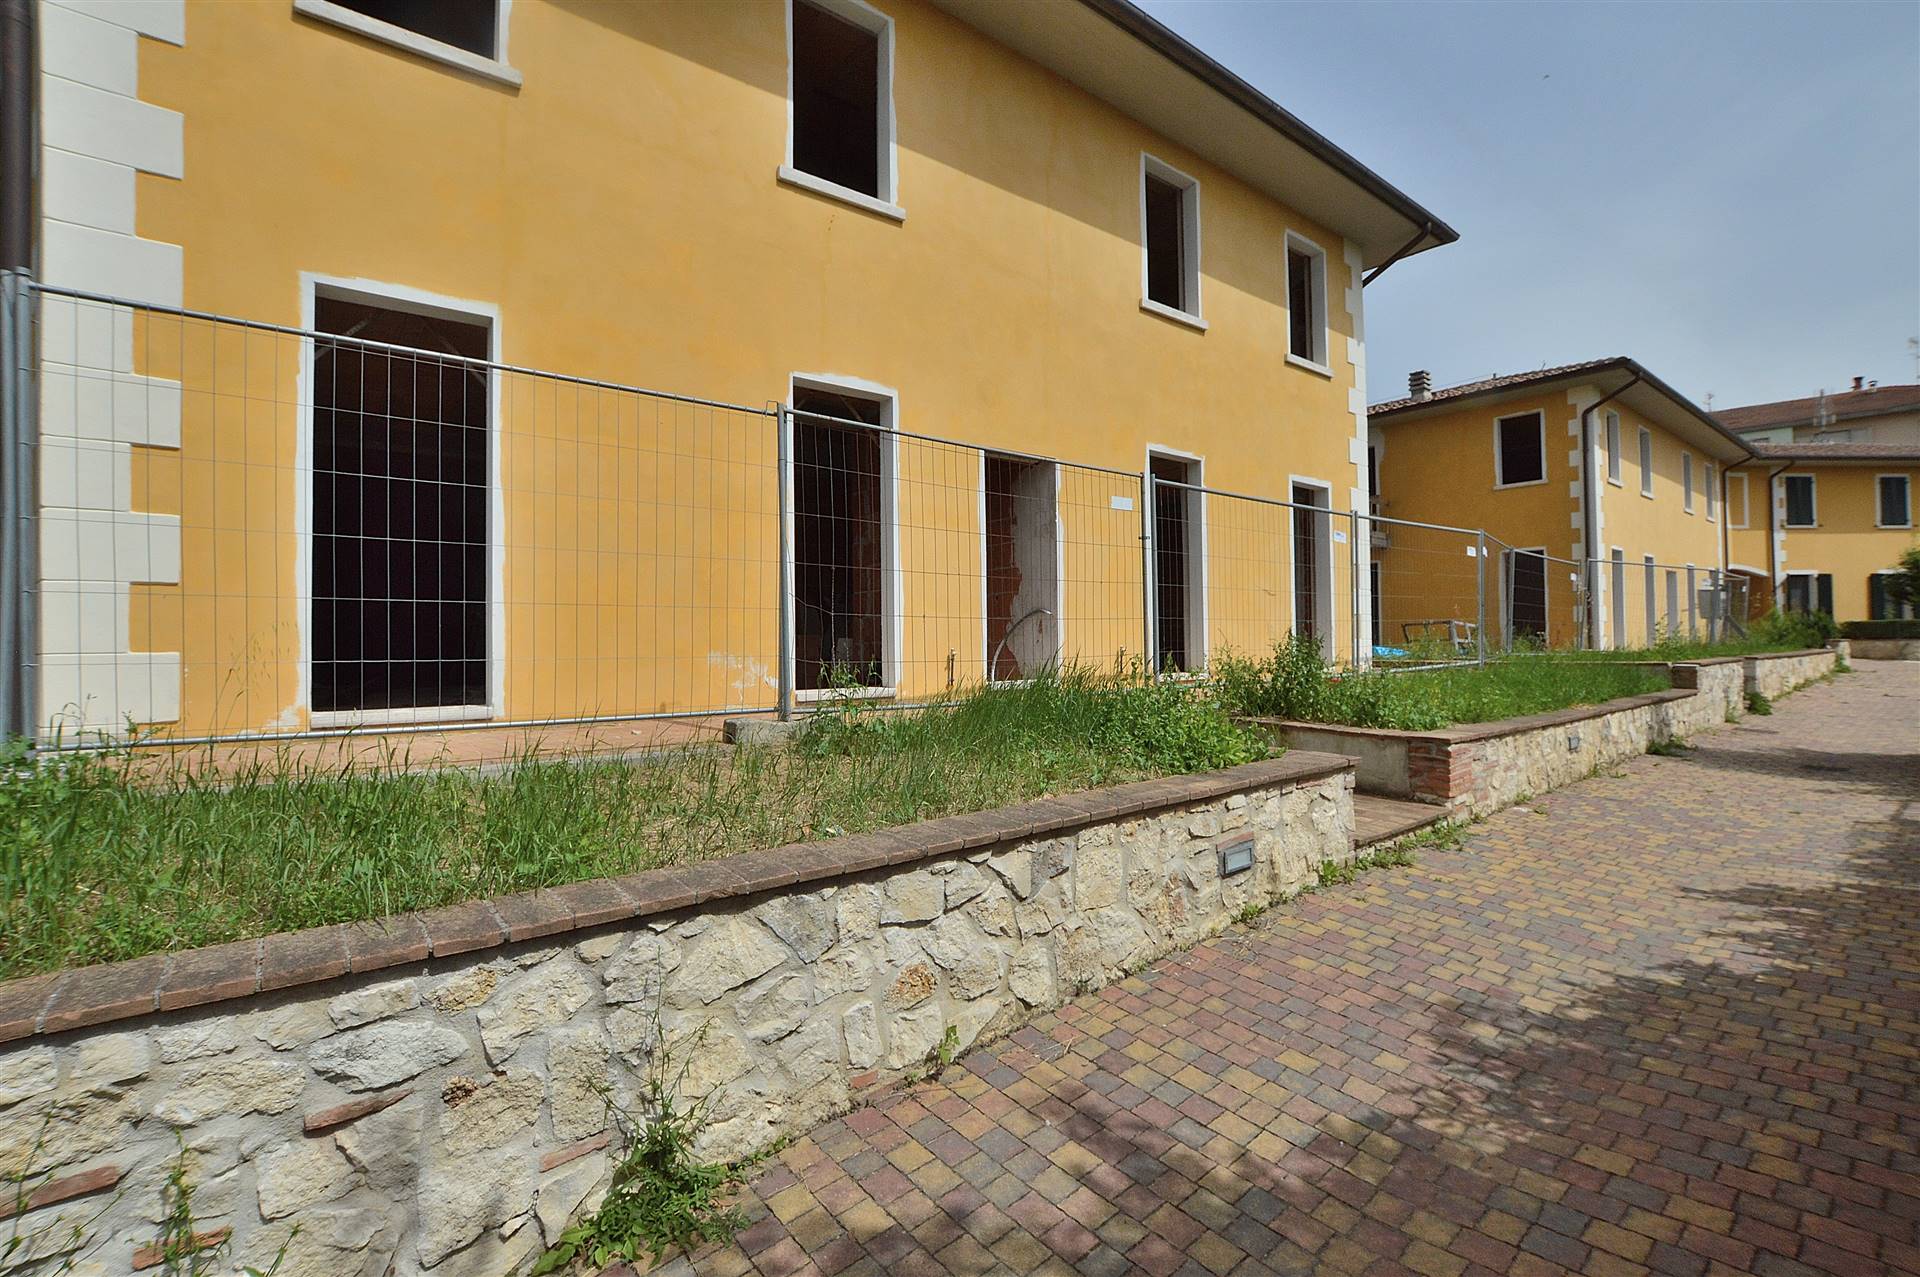 RAPOLANO TERME, Apartment for sale of 113 Sq. mt., New construction, Heating Individual heating system, Energetic class: A, Epi: 100 kwh/m2 year, 